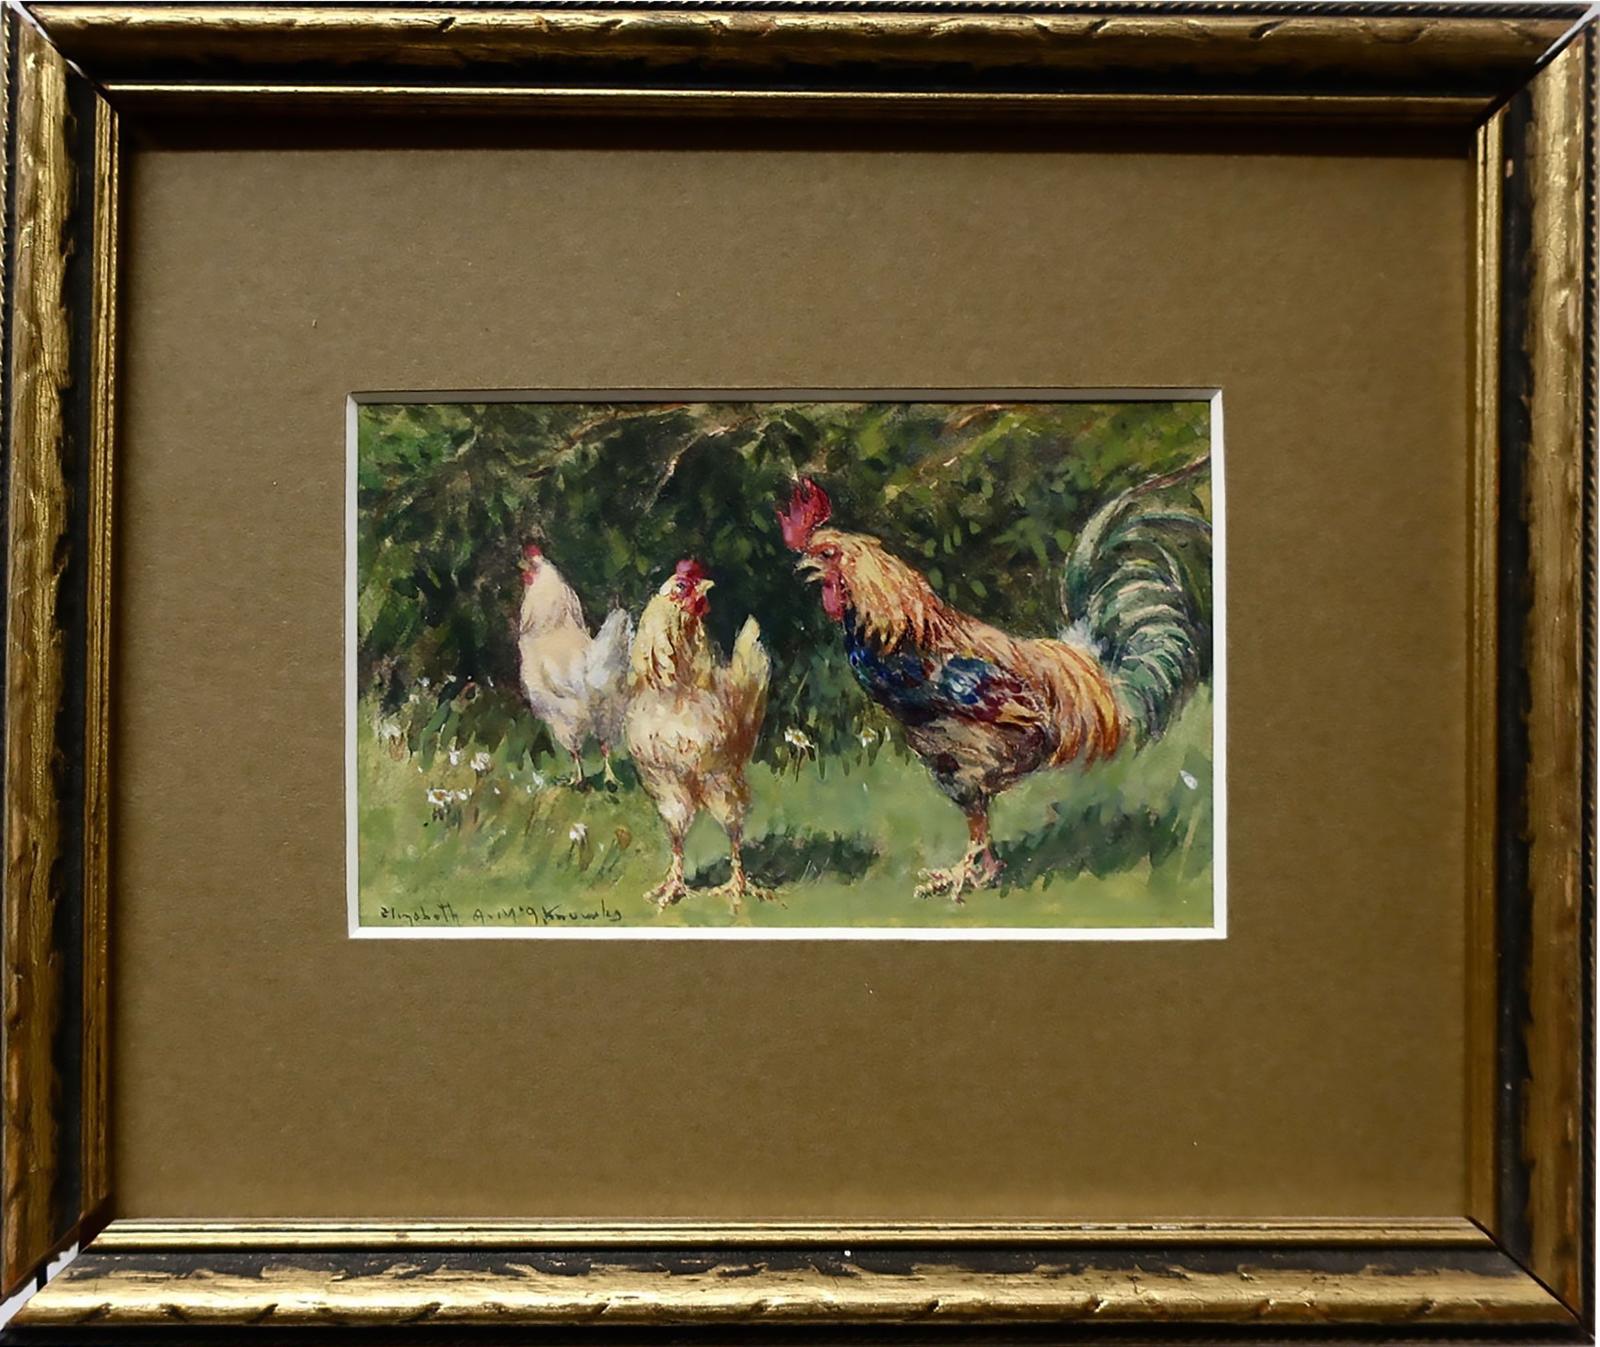 Elizabeth Annie Mcgilllivray Knowles (1866-1928) - Chickens And Rooster